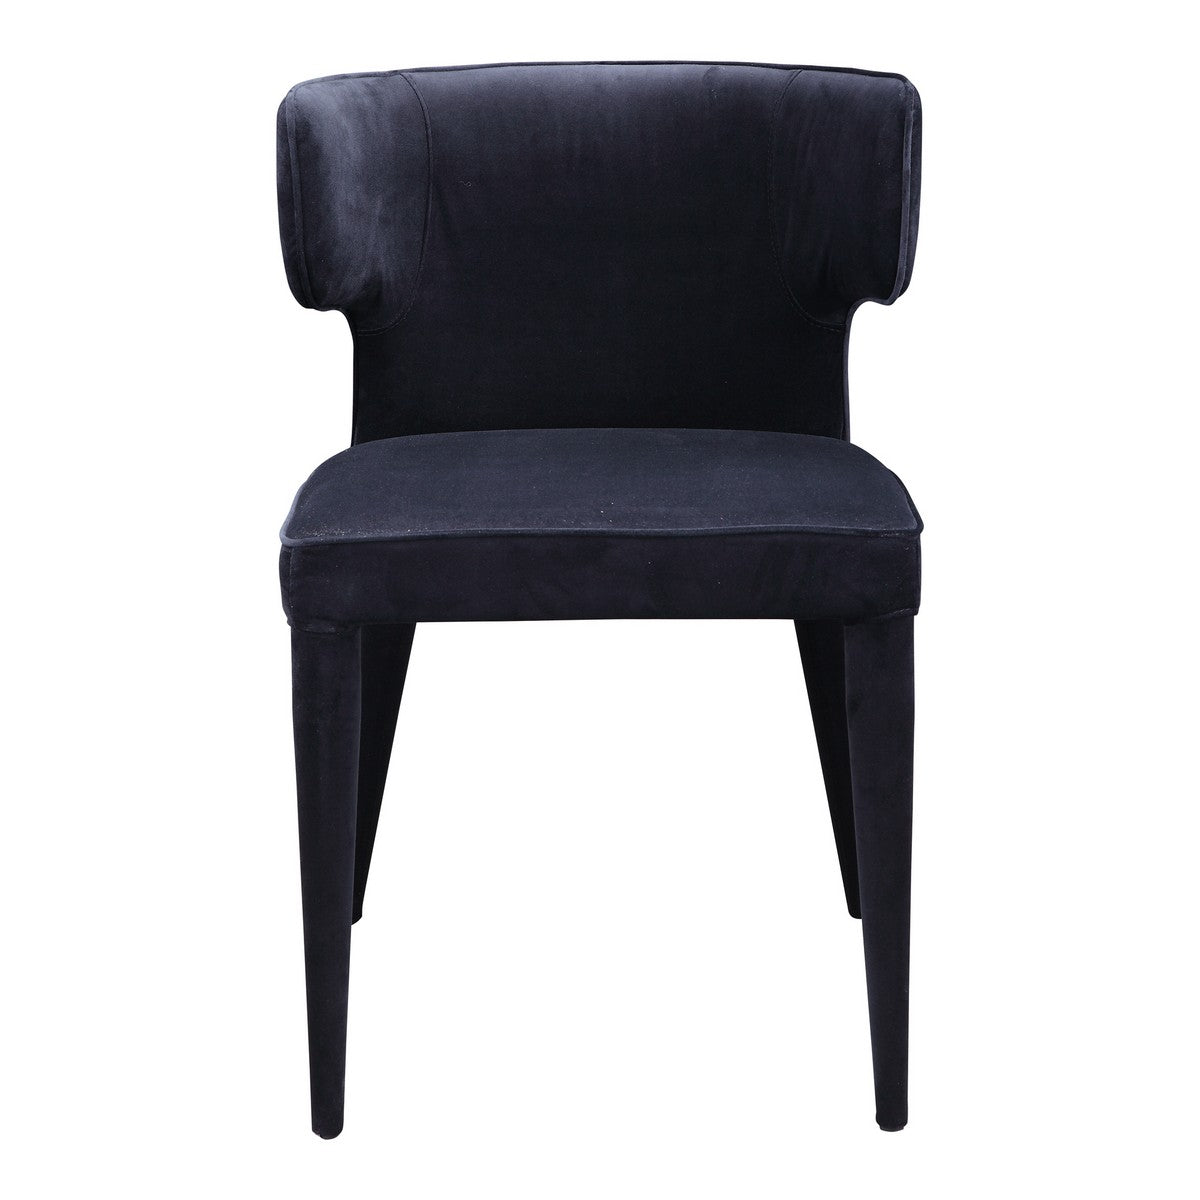 Moe's Home Collection Jennaya Dining Chair Black - EH-1103-02